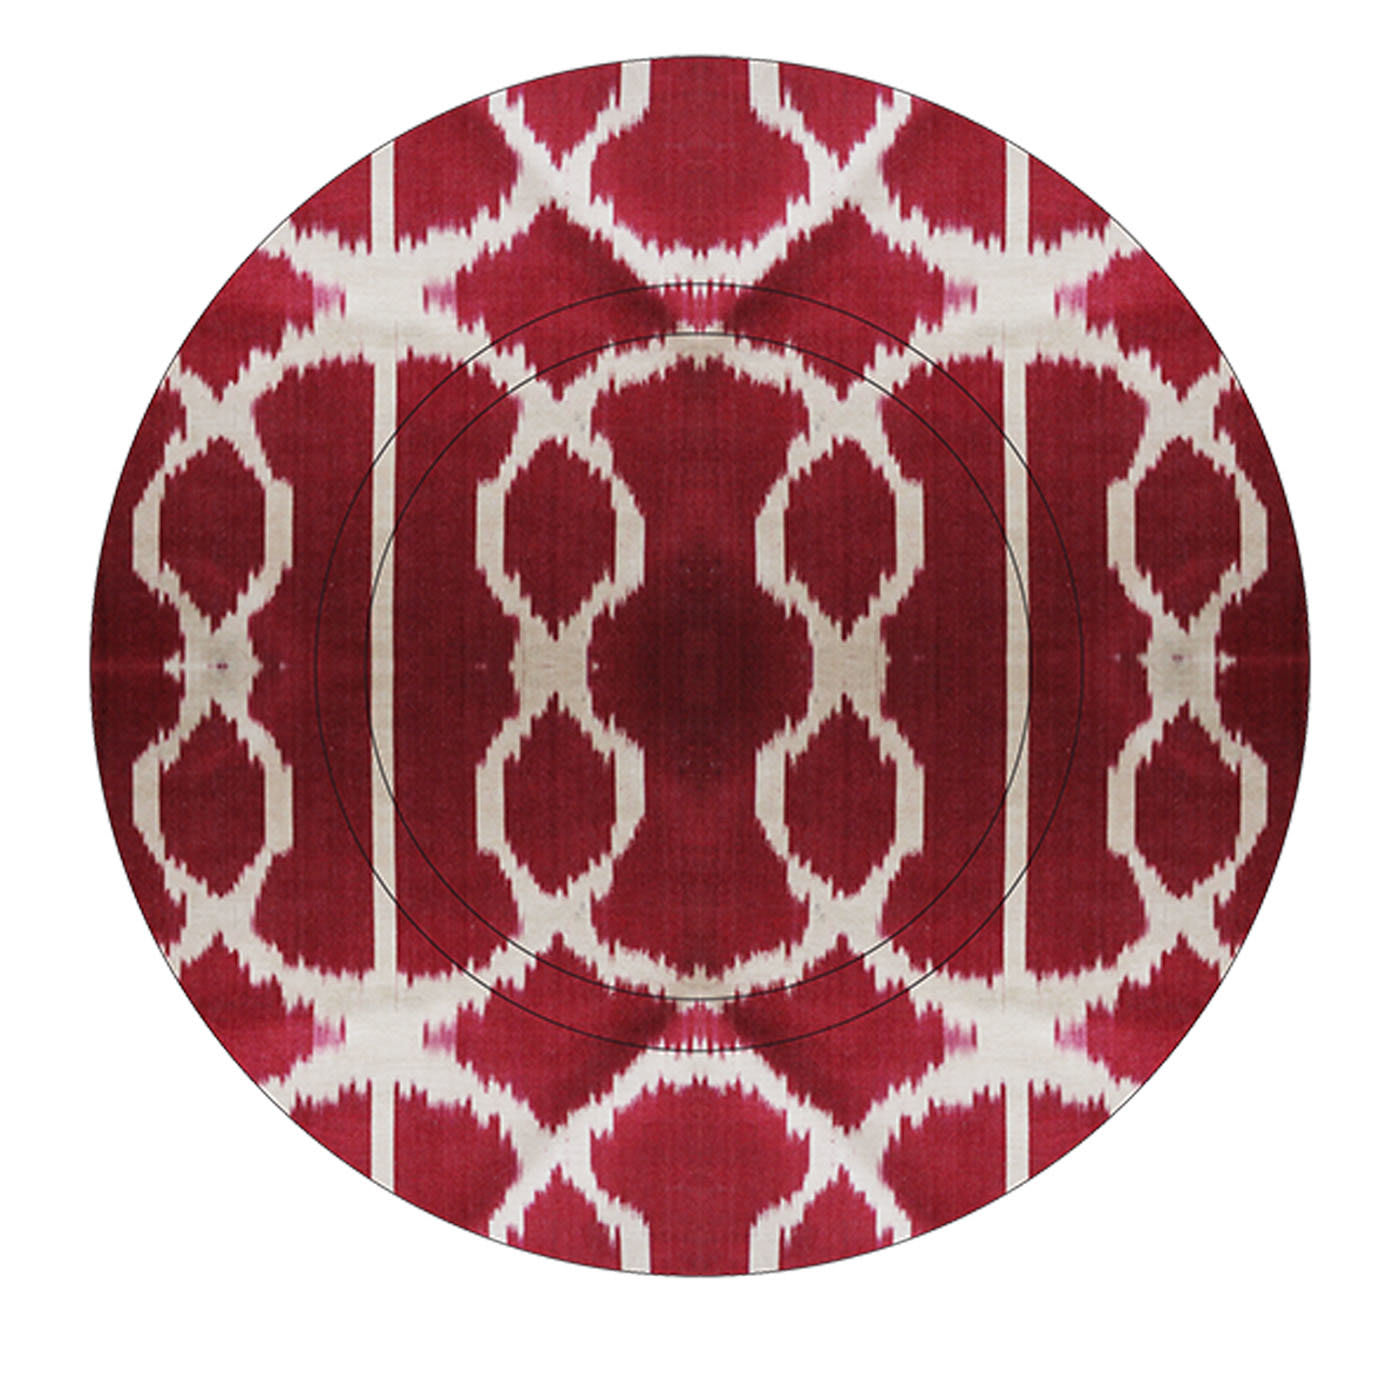 Set of 6 Ikat Glass Plates in Red and White - Les Ottomans